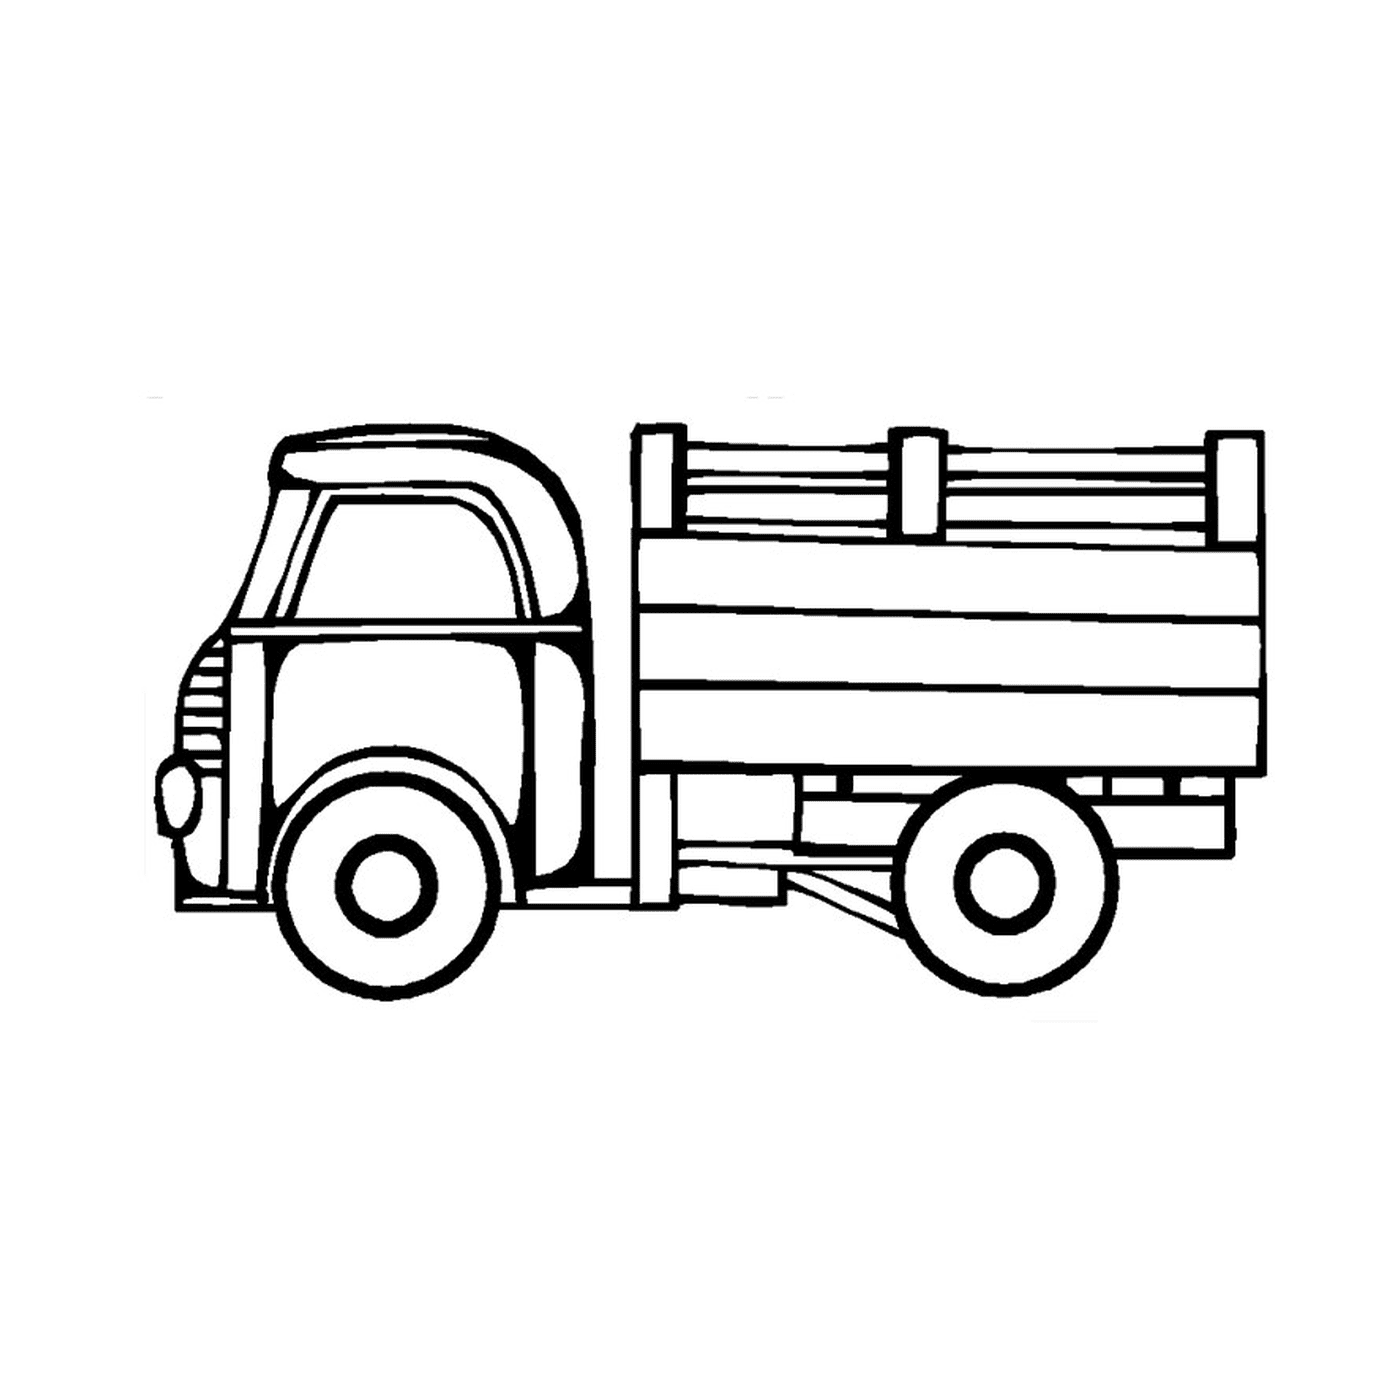  Truck with a wooden box in the back 